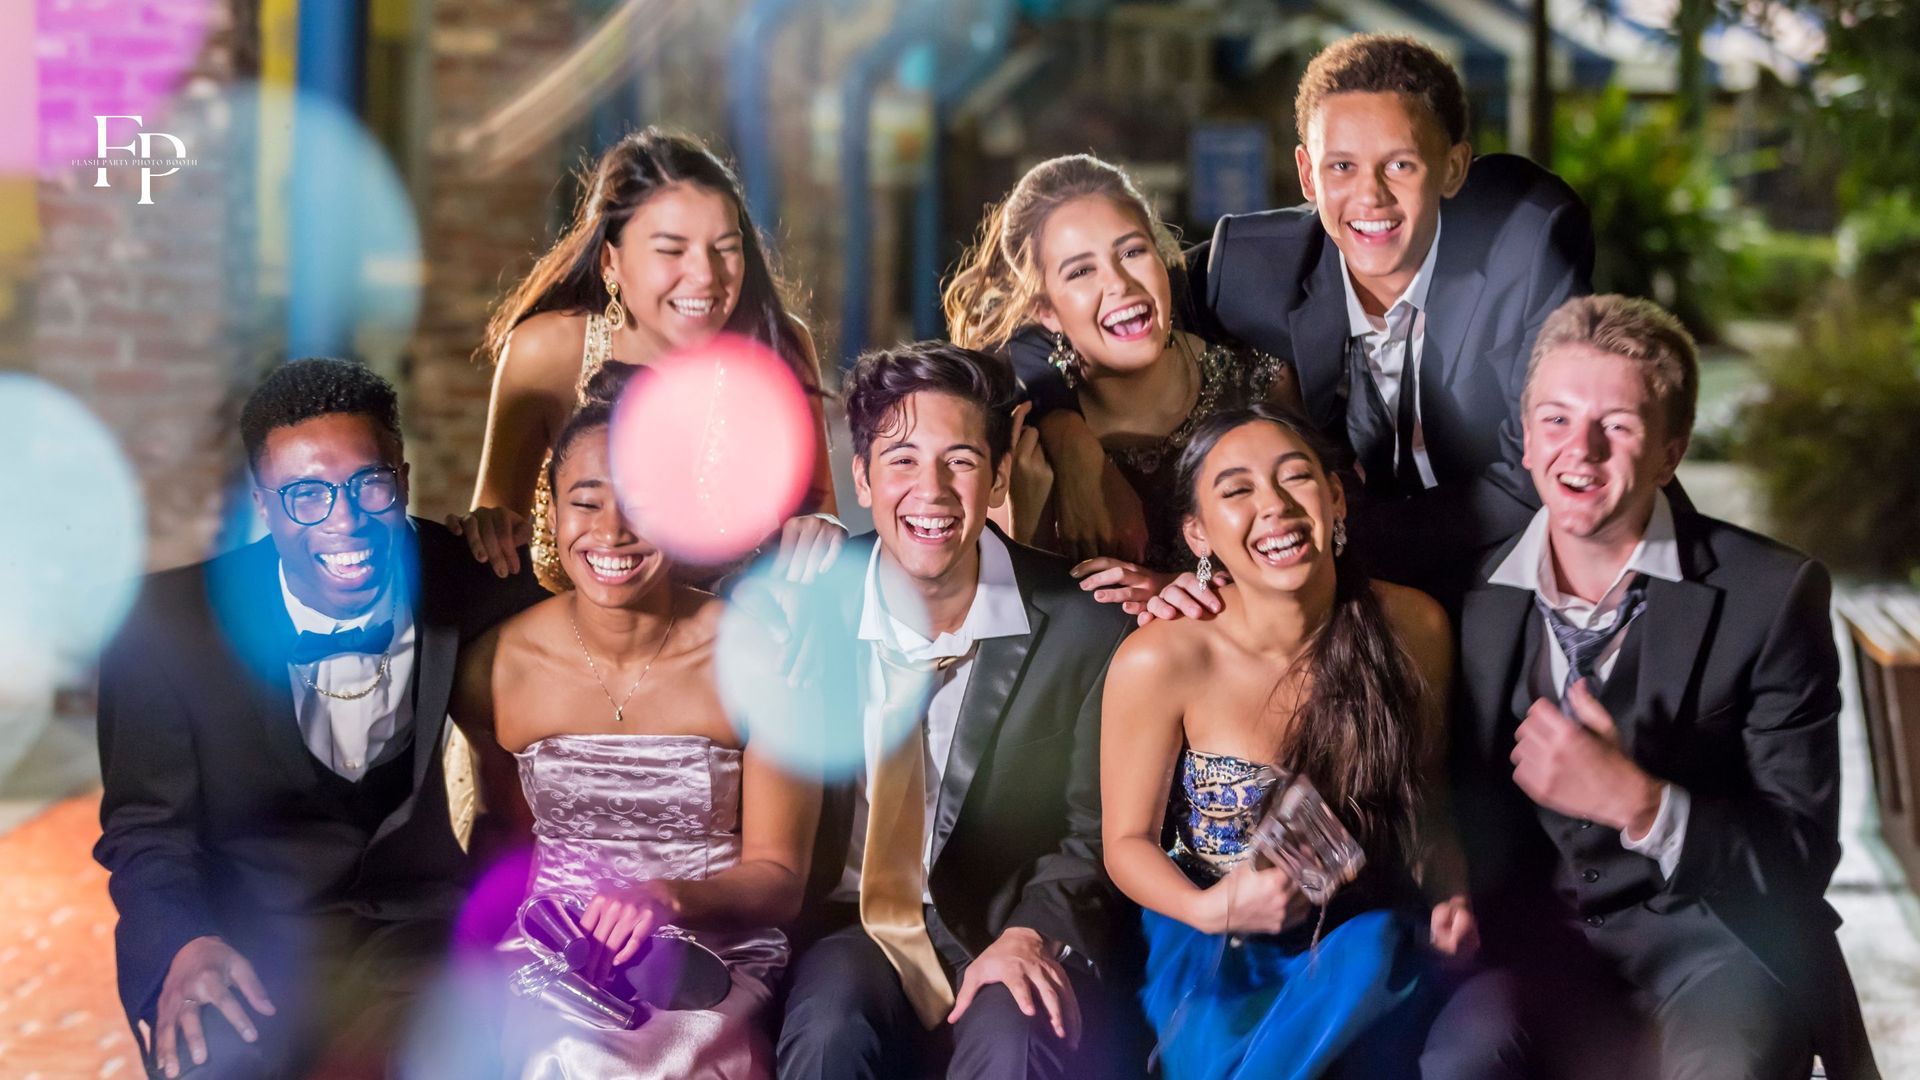 Friends come together for a picture-perfect moment at the prom in Waco.